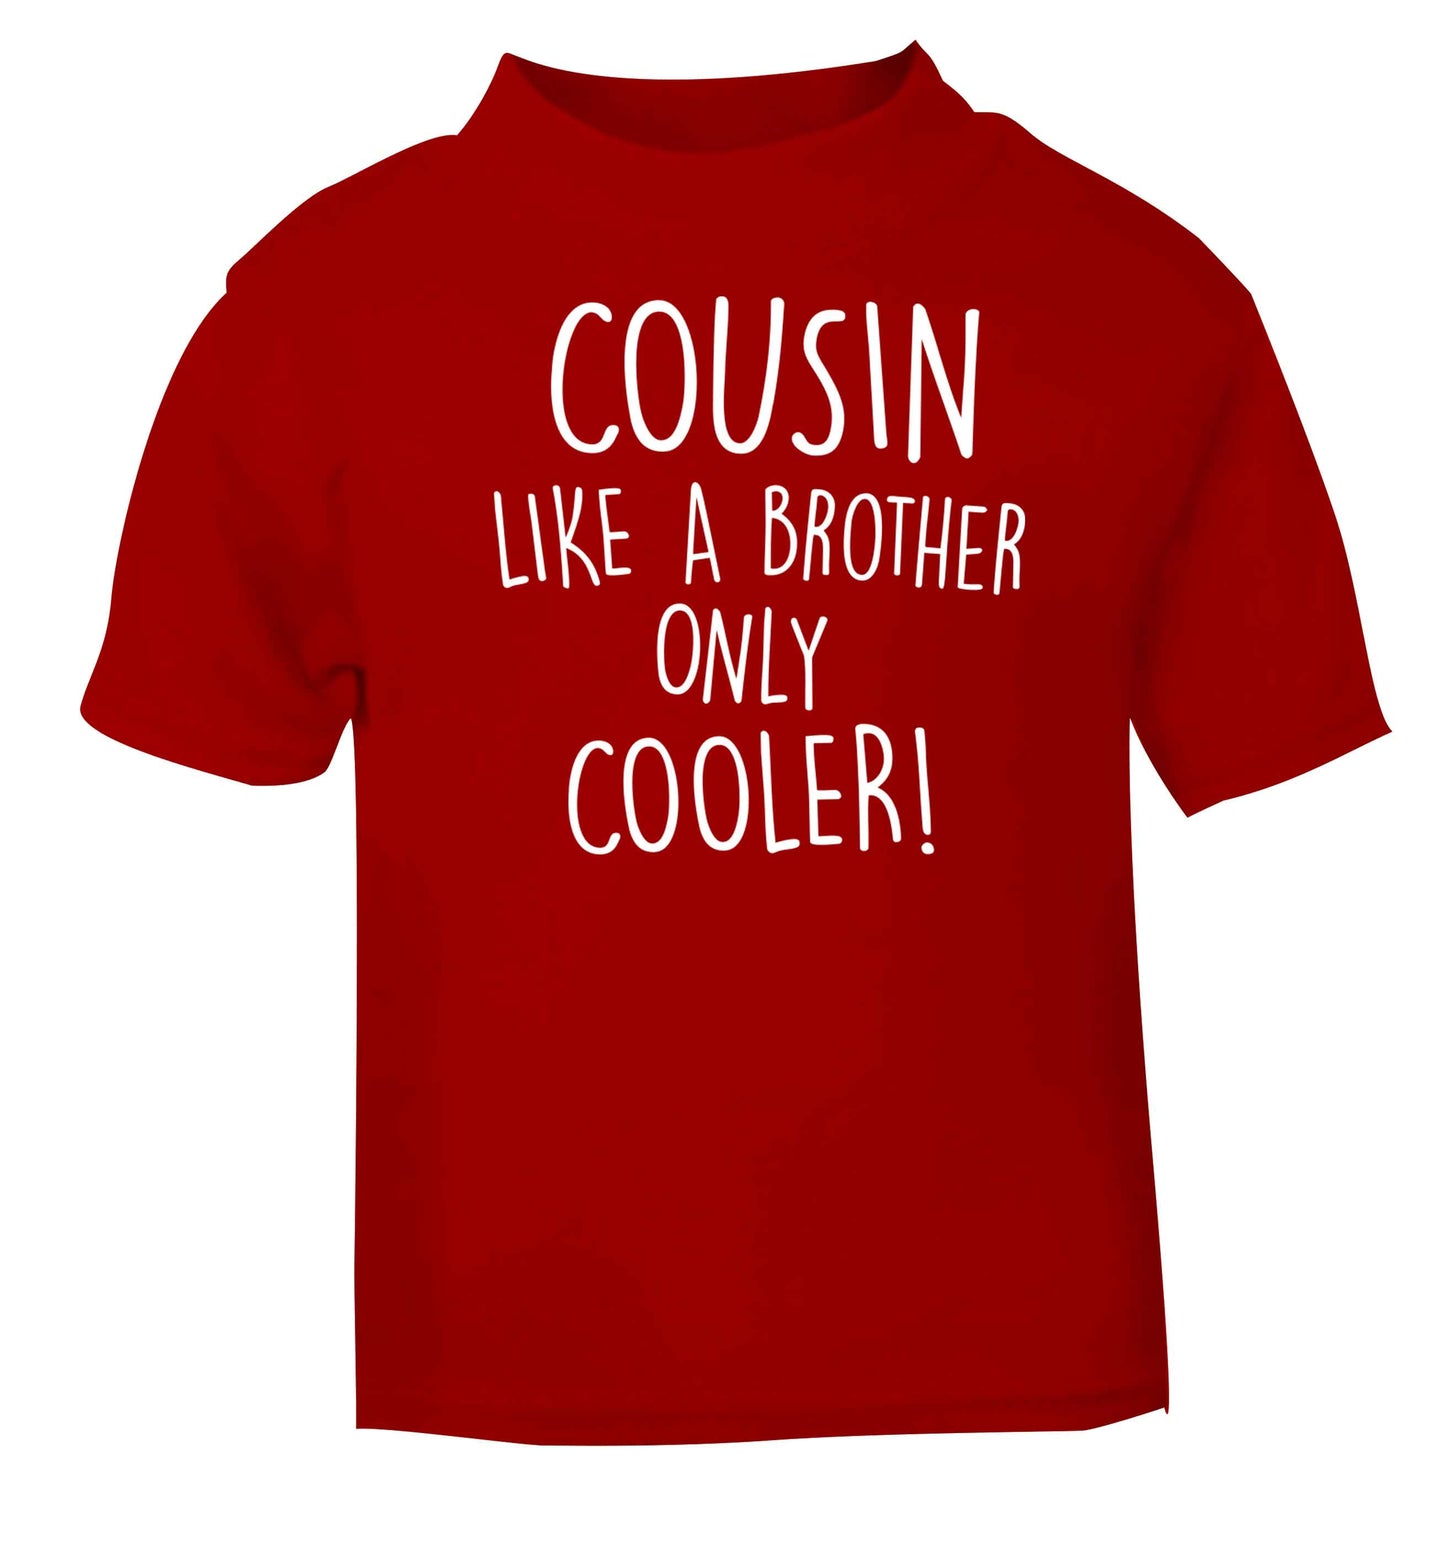 Cousin like a brother only cooler red baby toddler Tshirt 2 Years